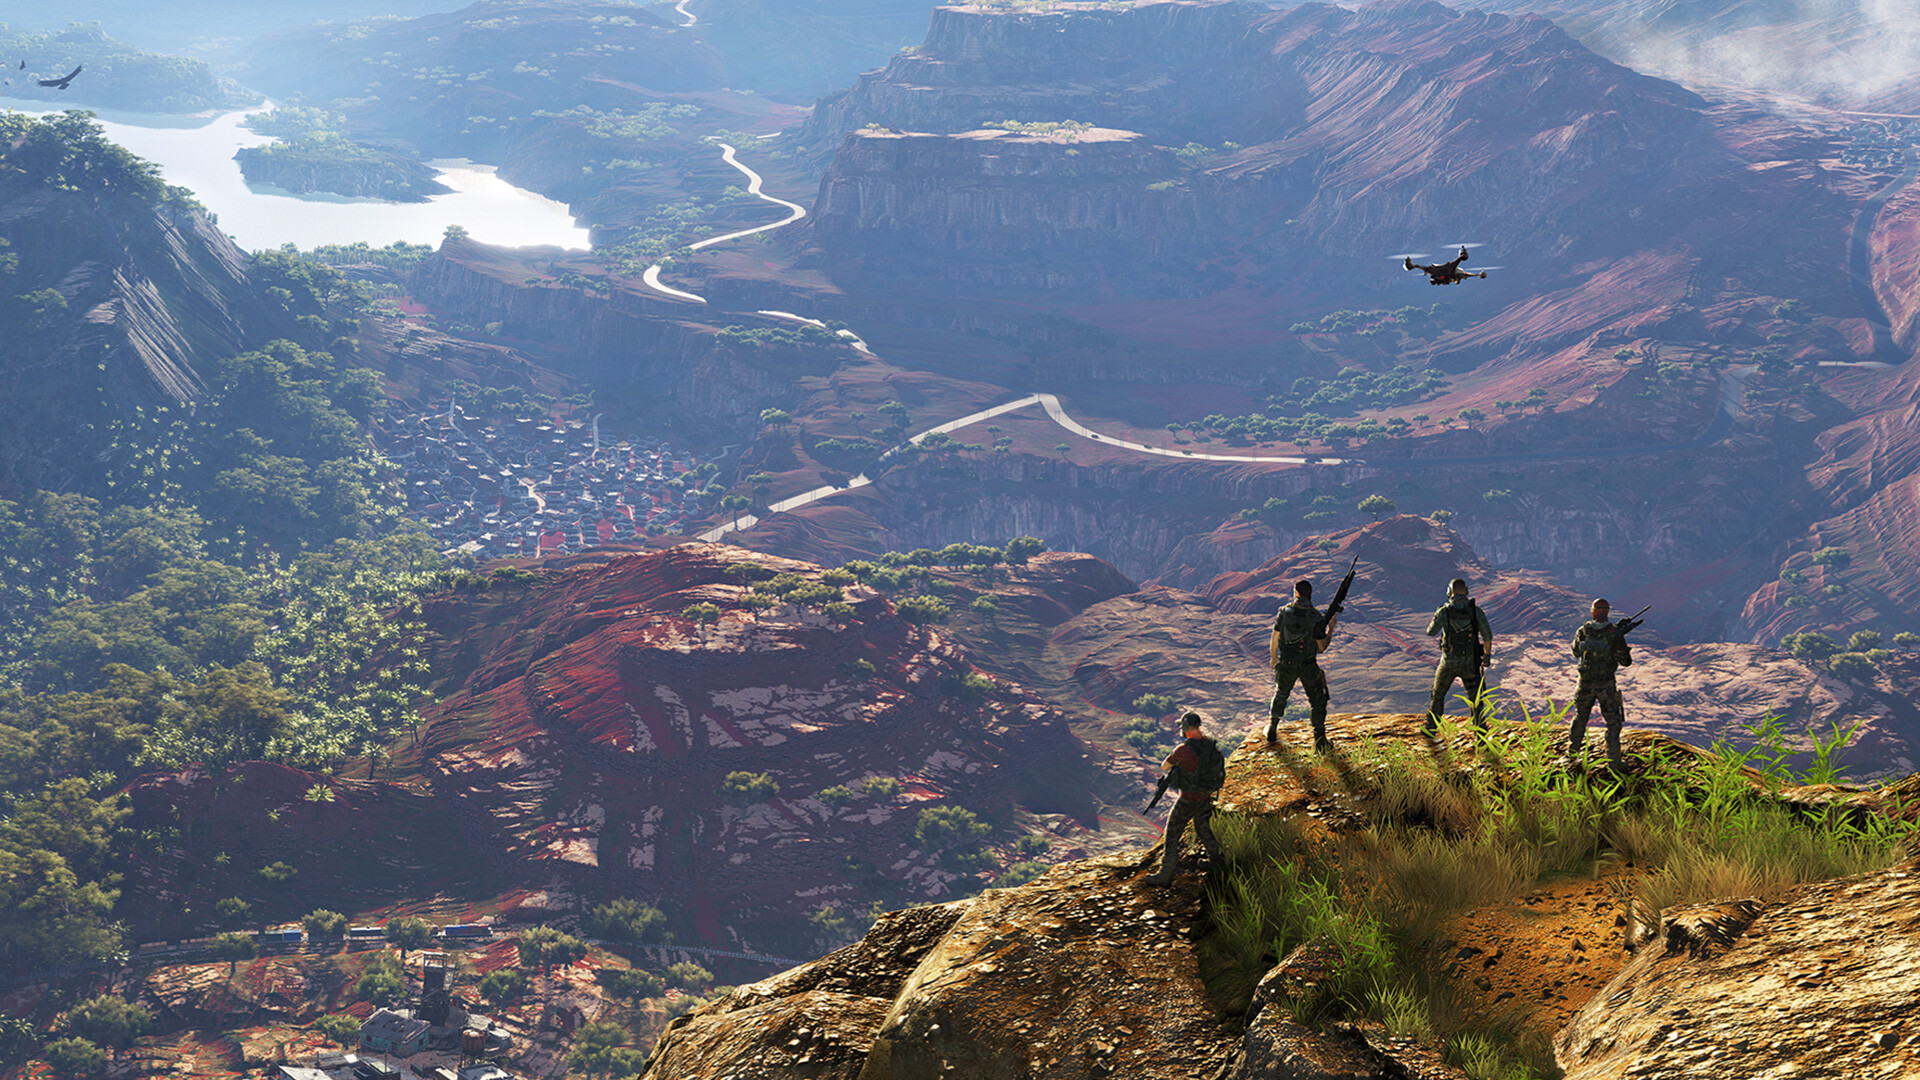 Ghost Recon: Wildlands: An open-world video game with the use of drones that can tag enemies and show objectives. 1920x1080 Full HD Wallpaper.